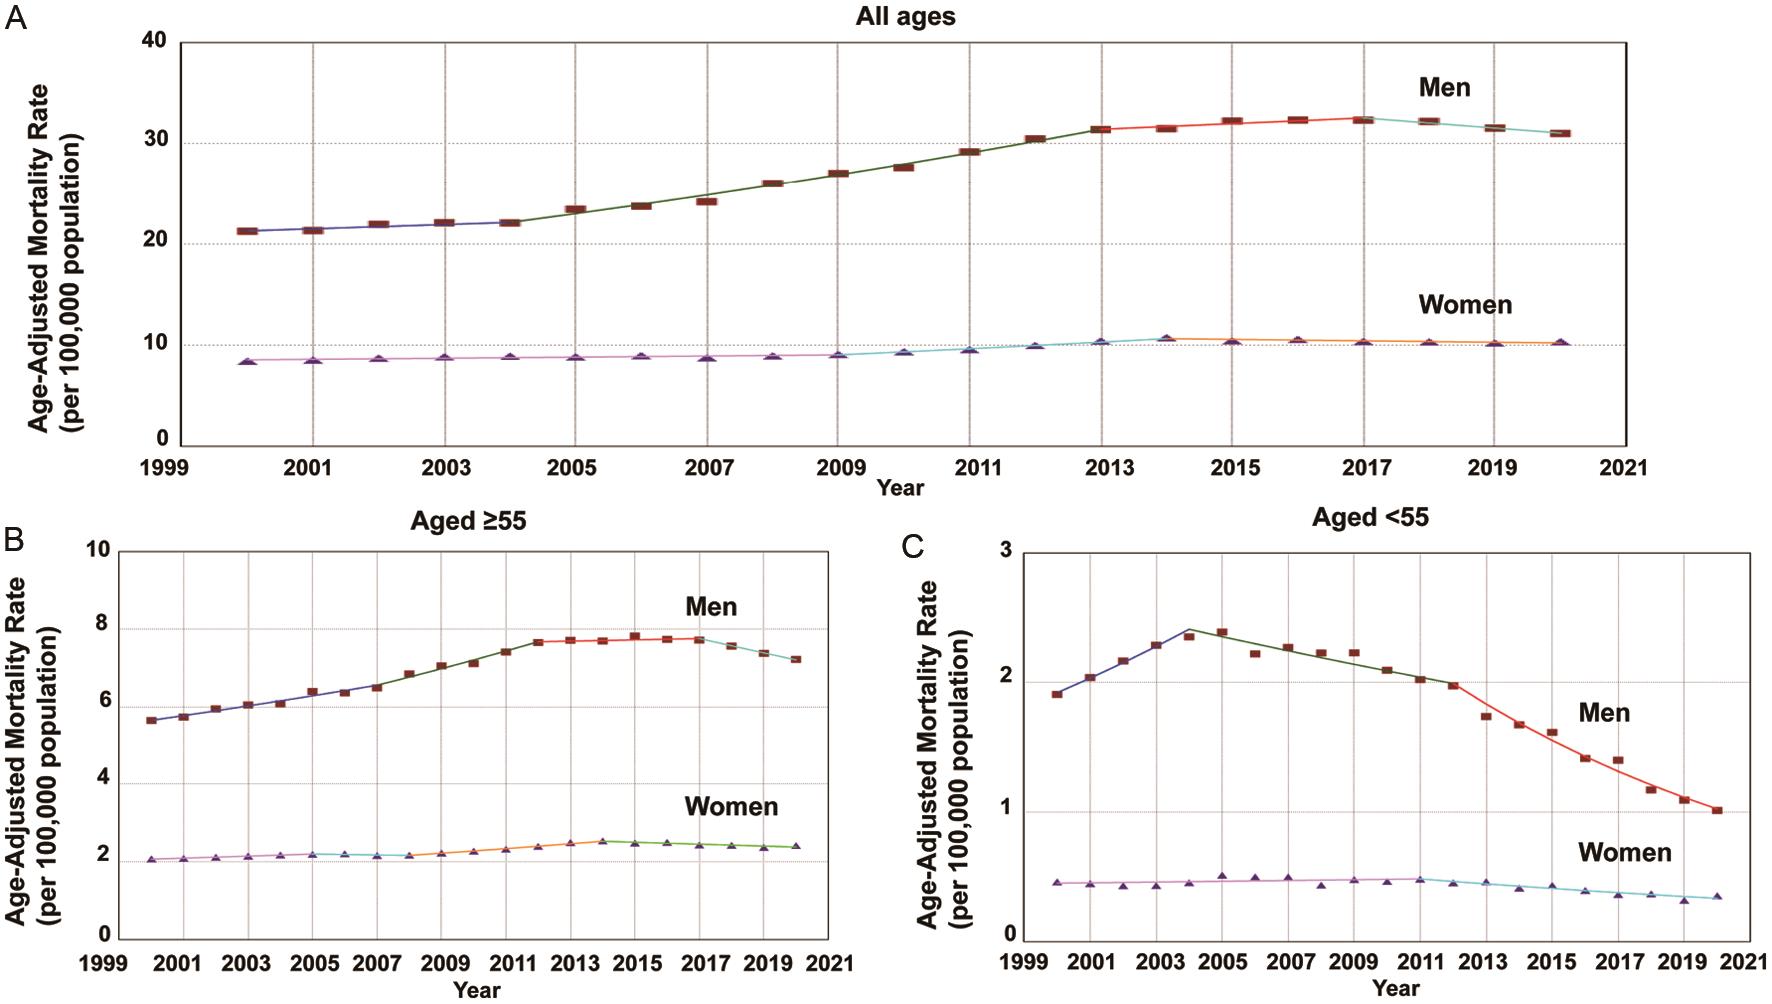 Sex-specific trends and age-adjusted mortality rates per 100,000 population for Hepatocellular Carcinoma (HCC) among different age groups.